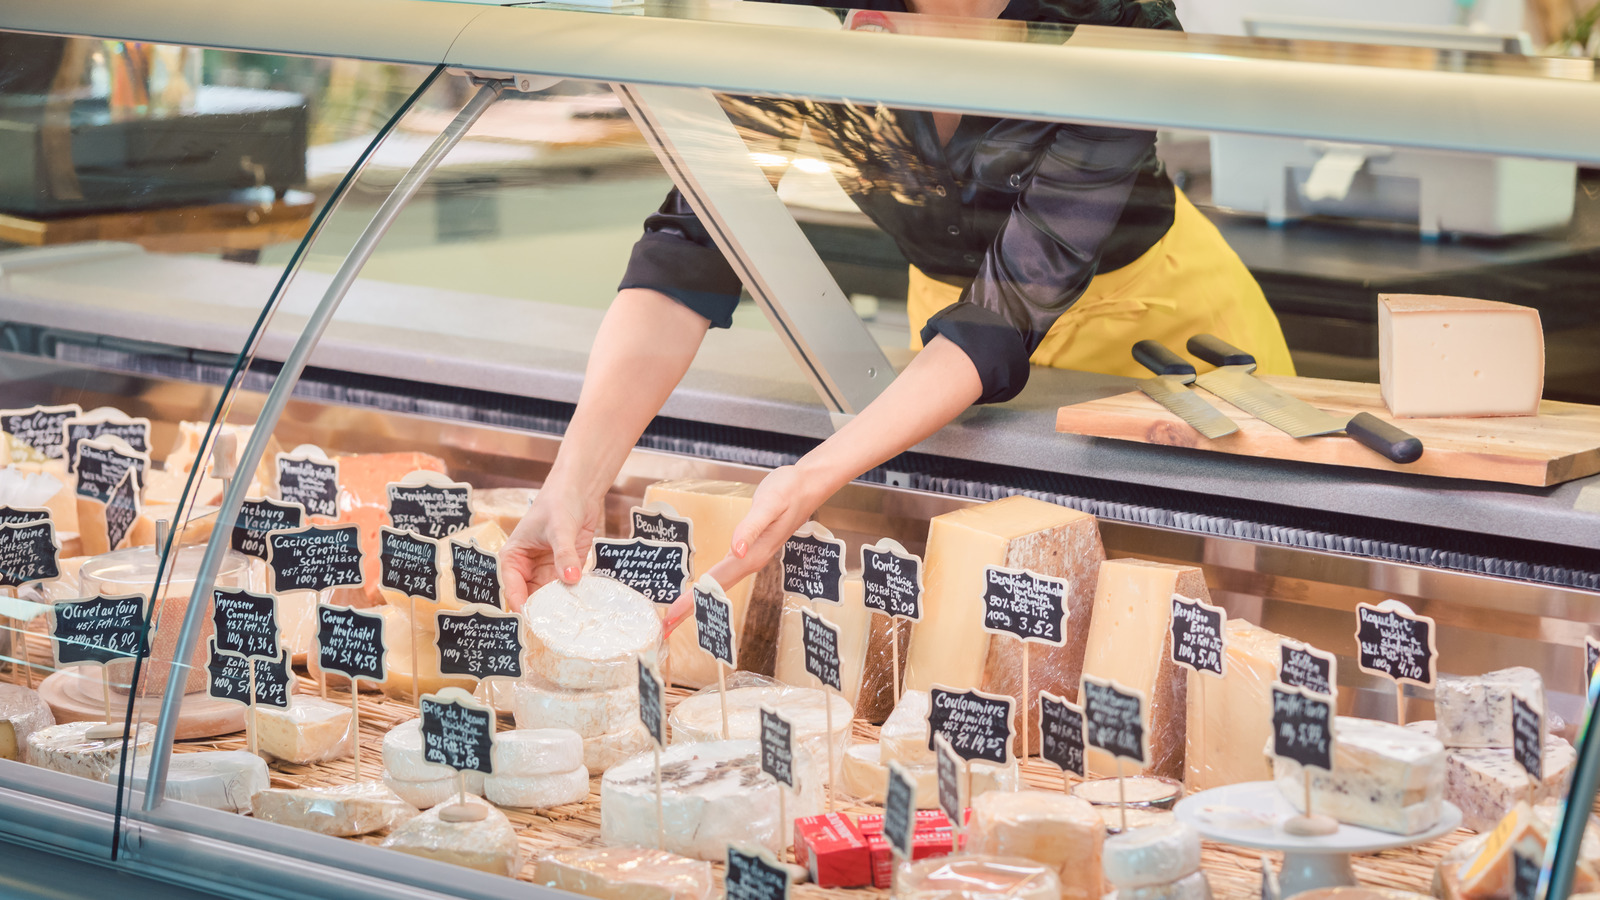 Here's What You Need To Know About Whole Foods' Cheese Recall